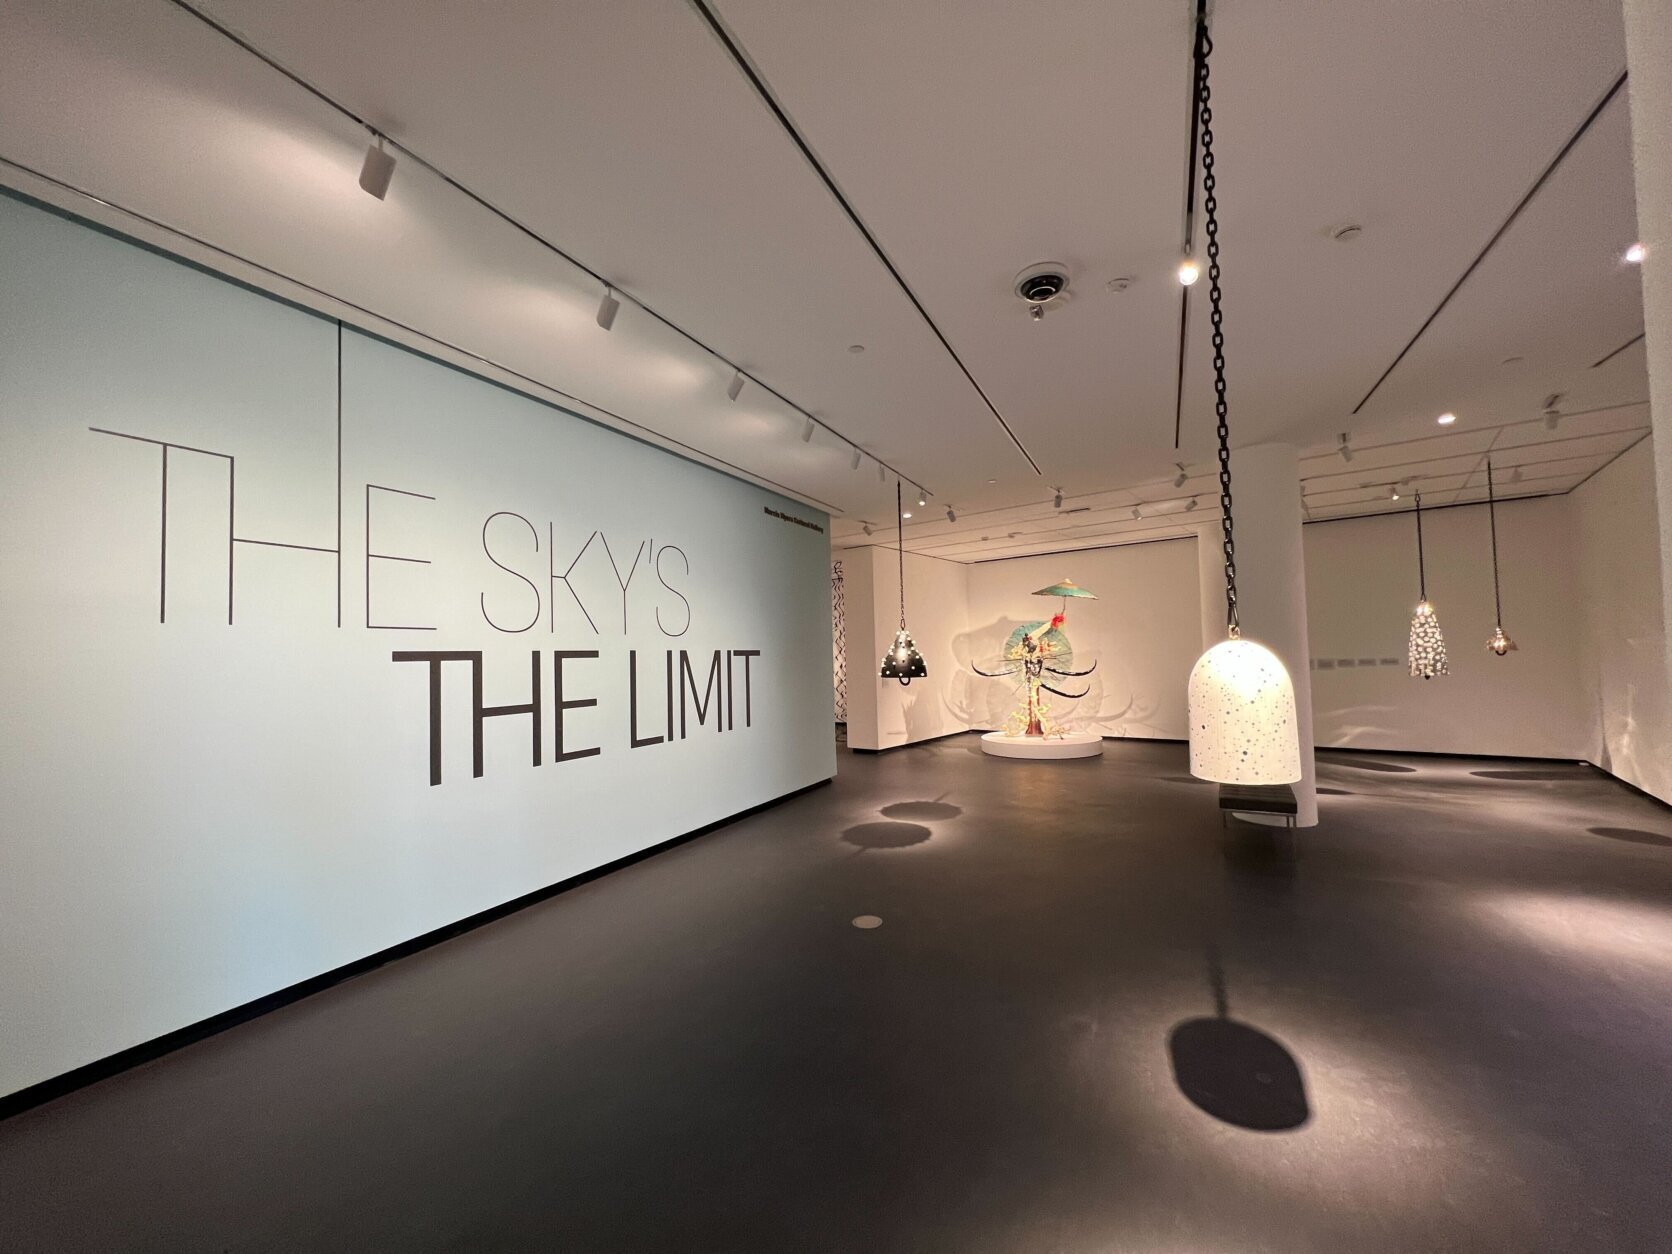 <h2>What&#8217;s inside?</h2>
<p>&#8220;The Sky Is The Limit&#8221; collection showcases many works that were in the museum&#8217;s collection before. In the past, there wasn&#8217;t enough space for them to be displayed.</p>
